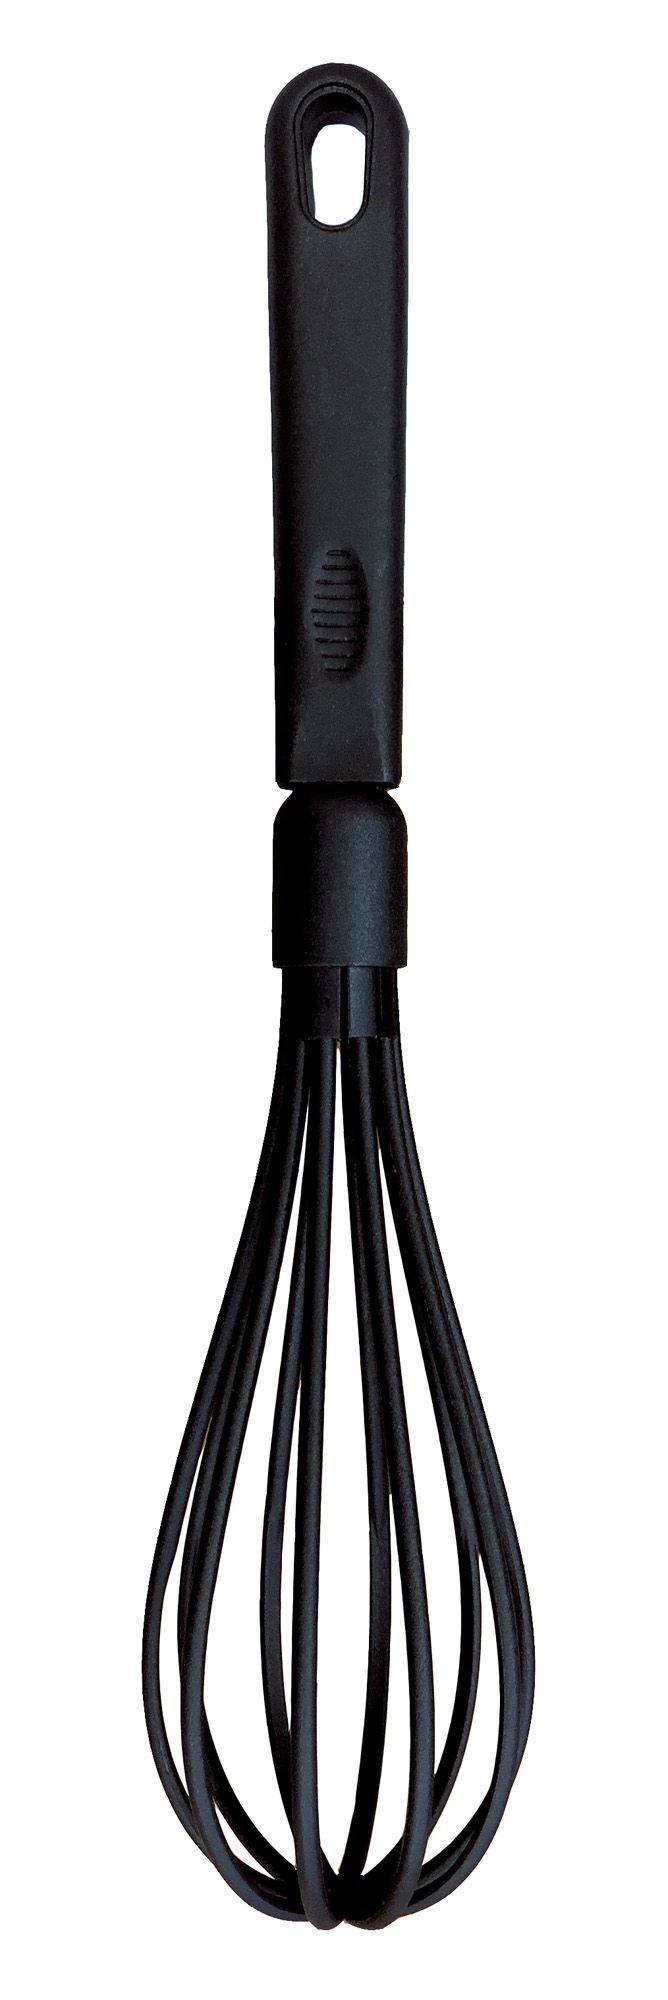 Winco NC-WP Heat Resistant Whisk